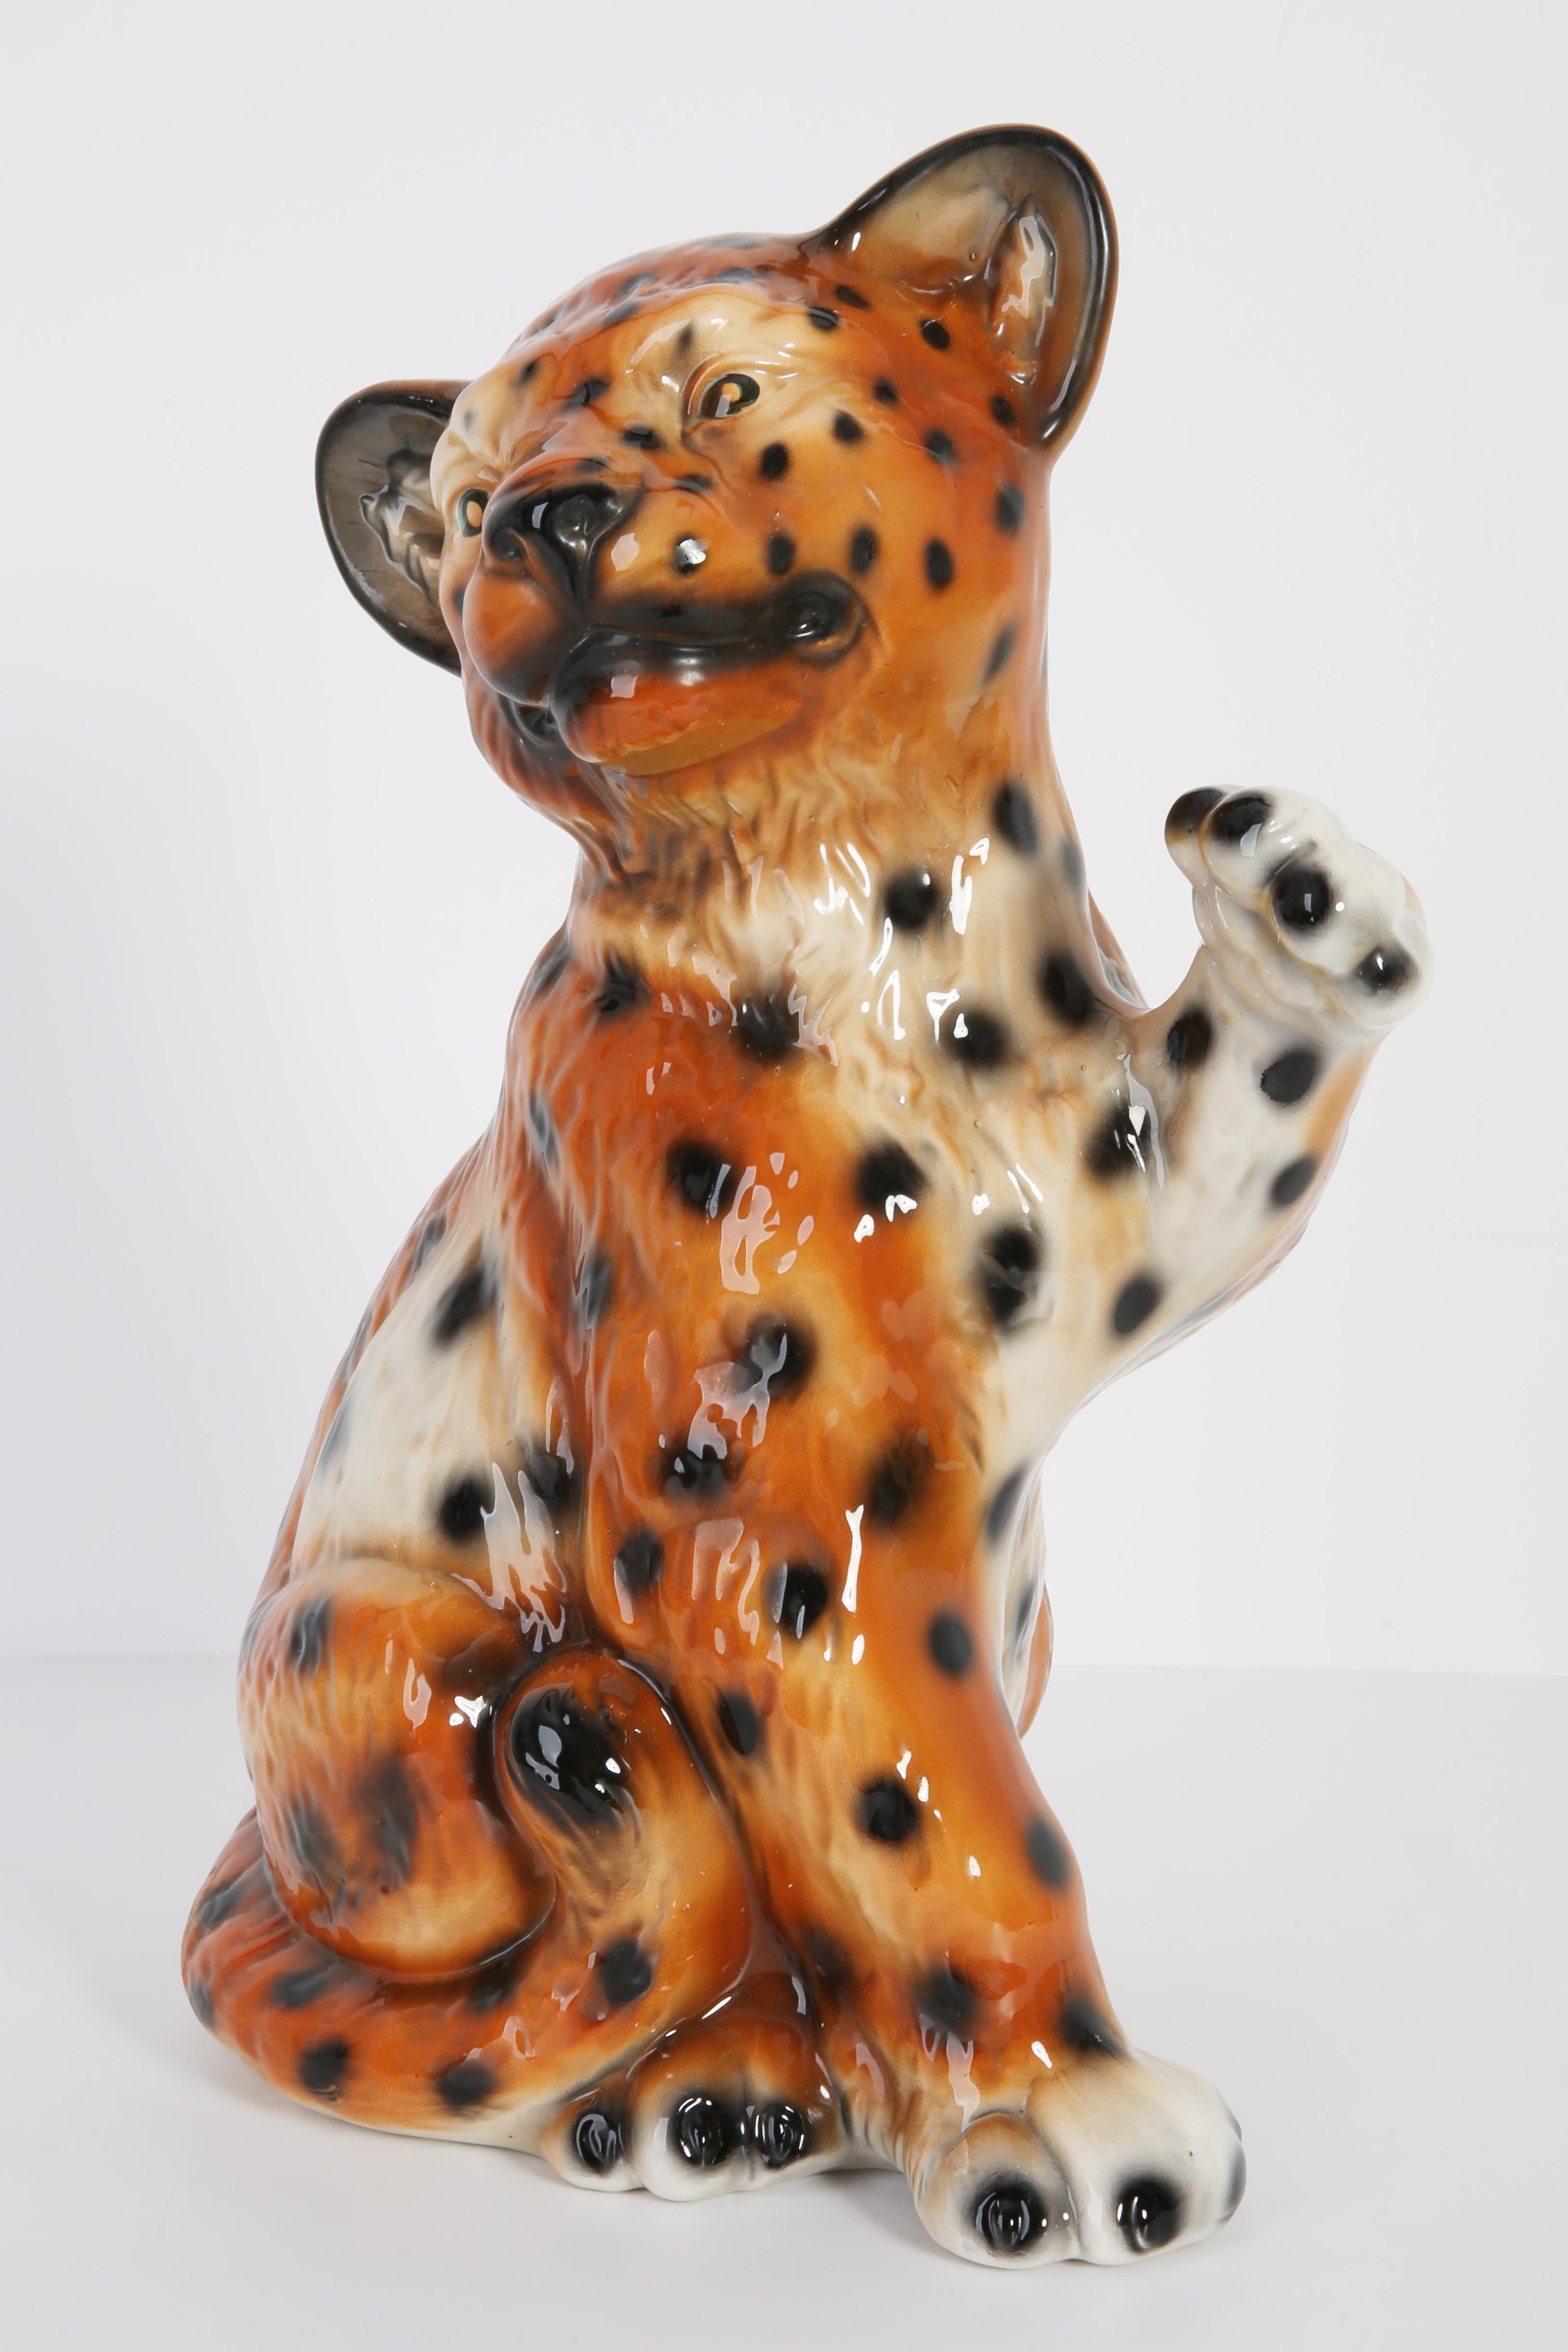 Italian ceramic, signatures, very good original very good vintage condition. No damages. Leopard was produced in 1960s in Italy.